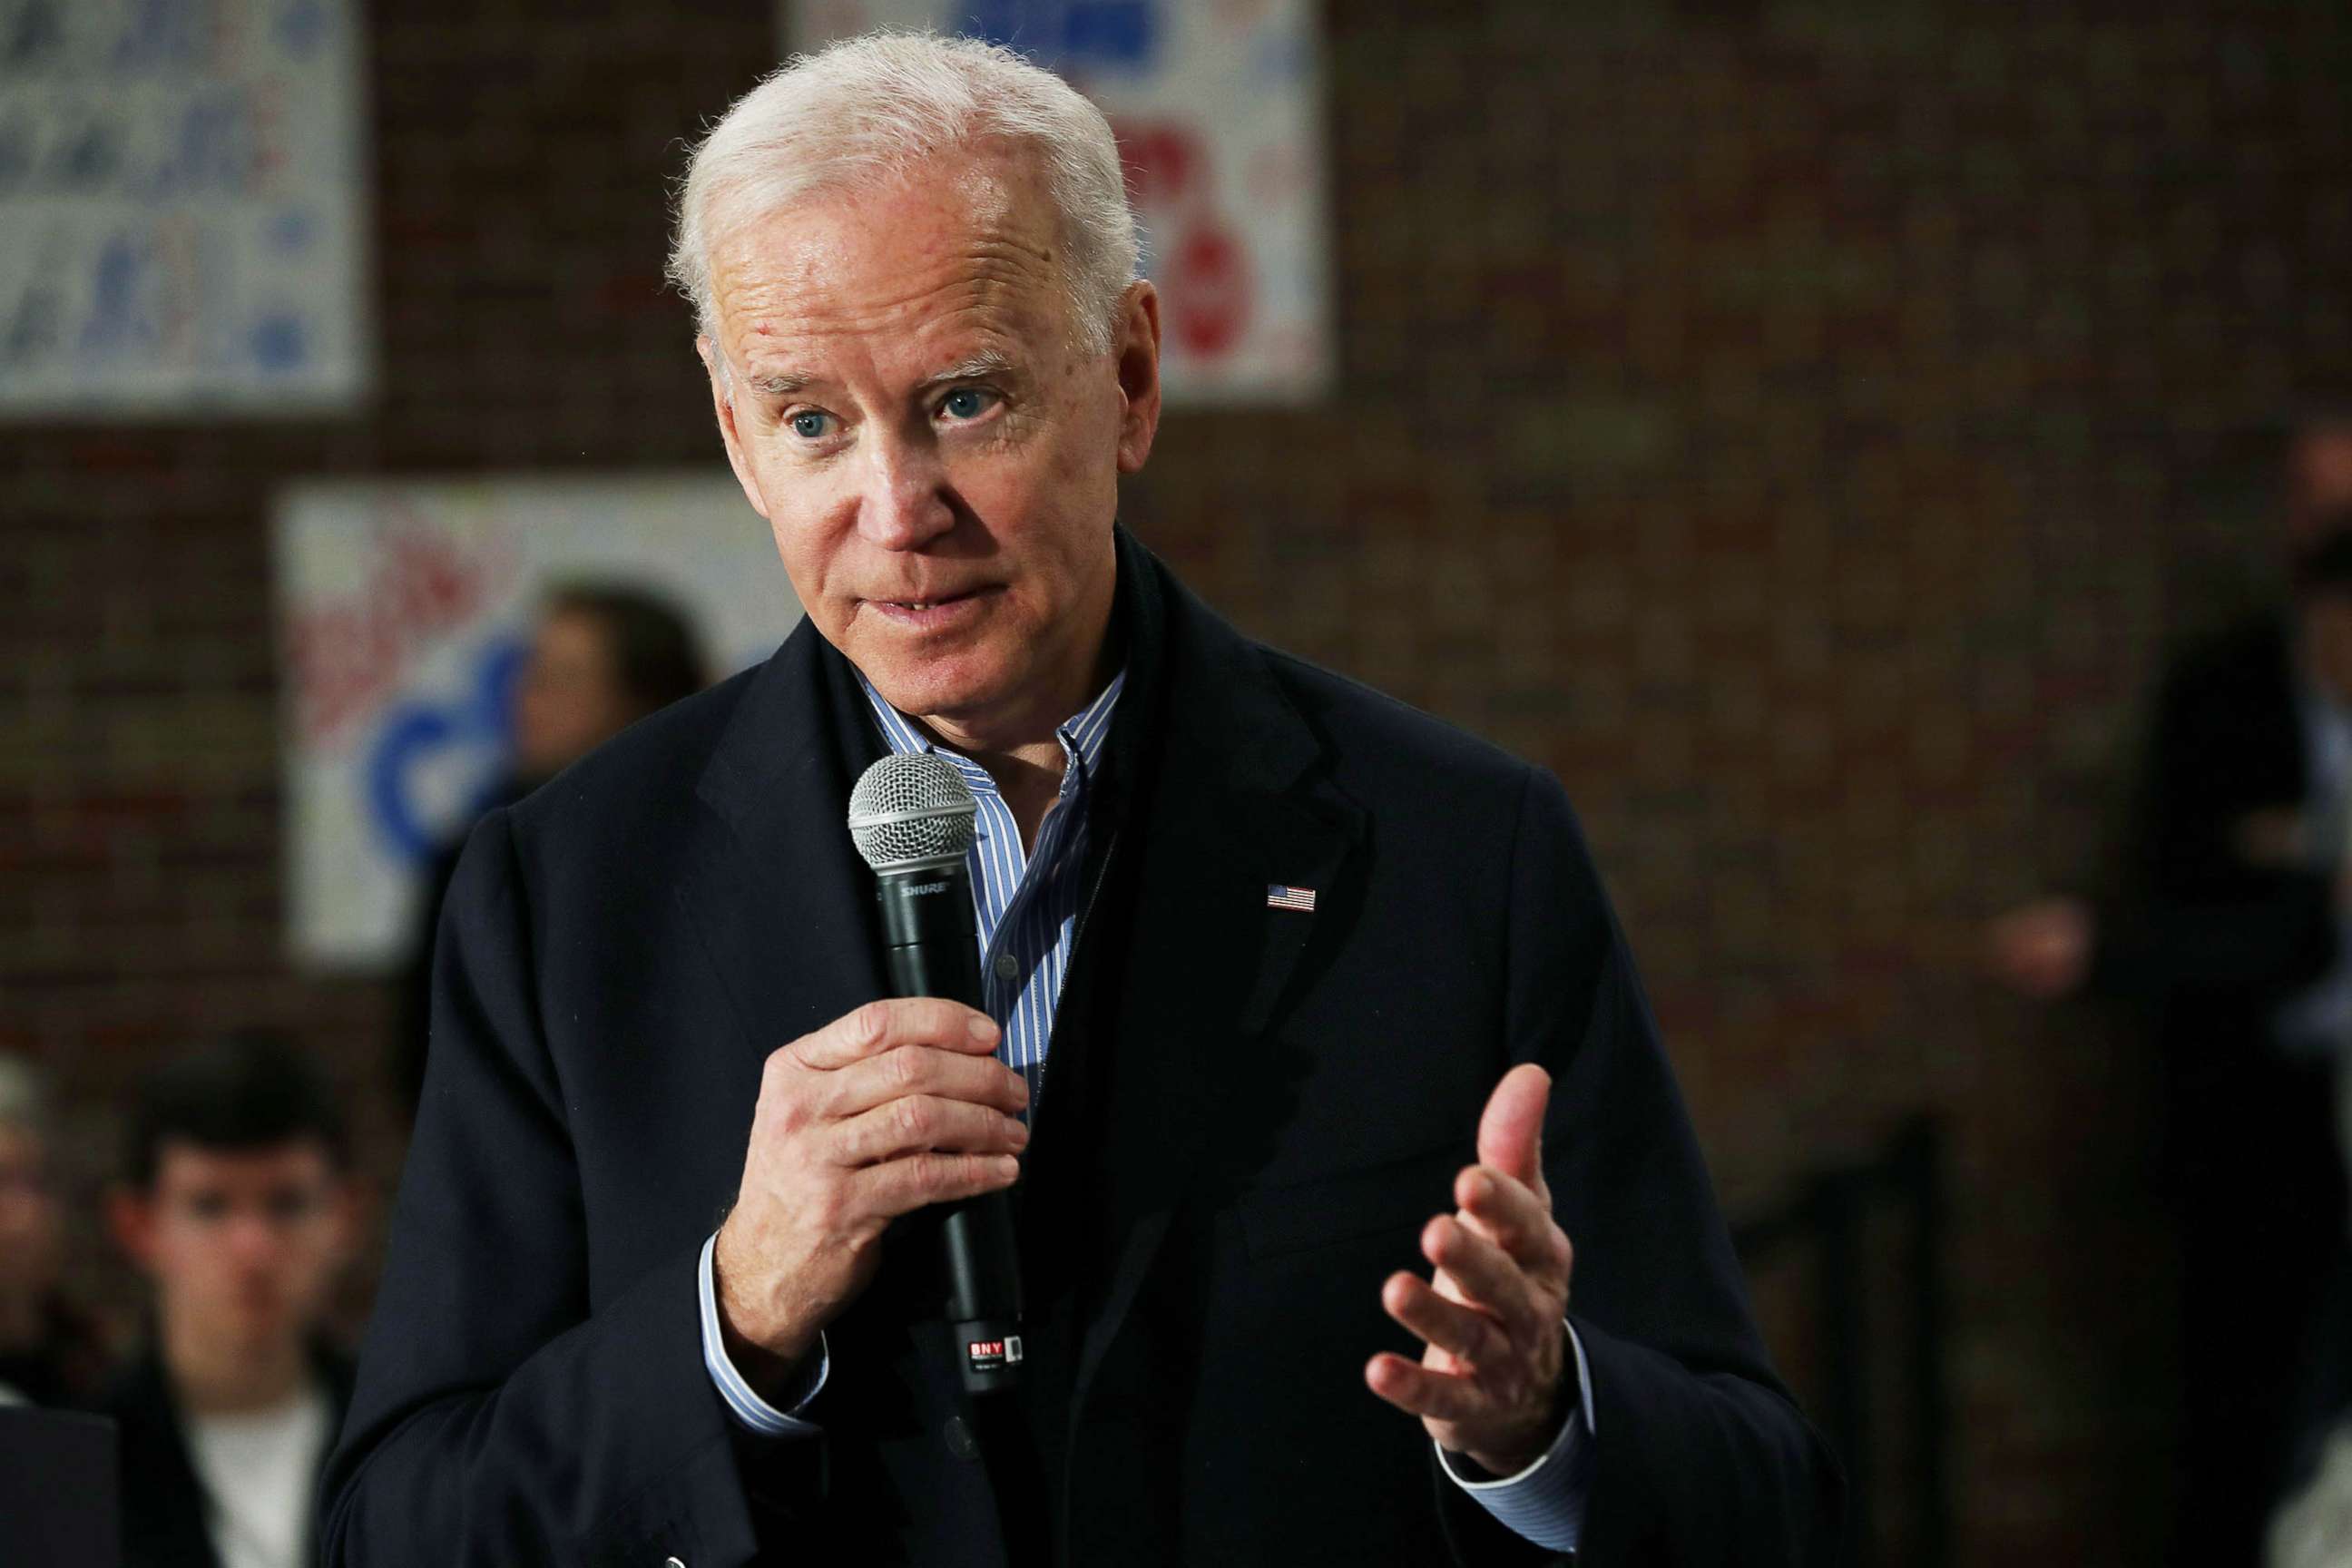 PHOTO: Democratic presidential candidate, former Vice President Joe Biden speaks during a campaign stop, Dec. 28, 2019, in Tipton, Iowa.